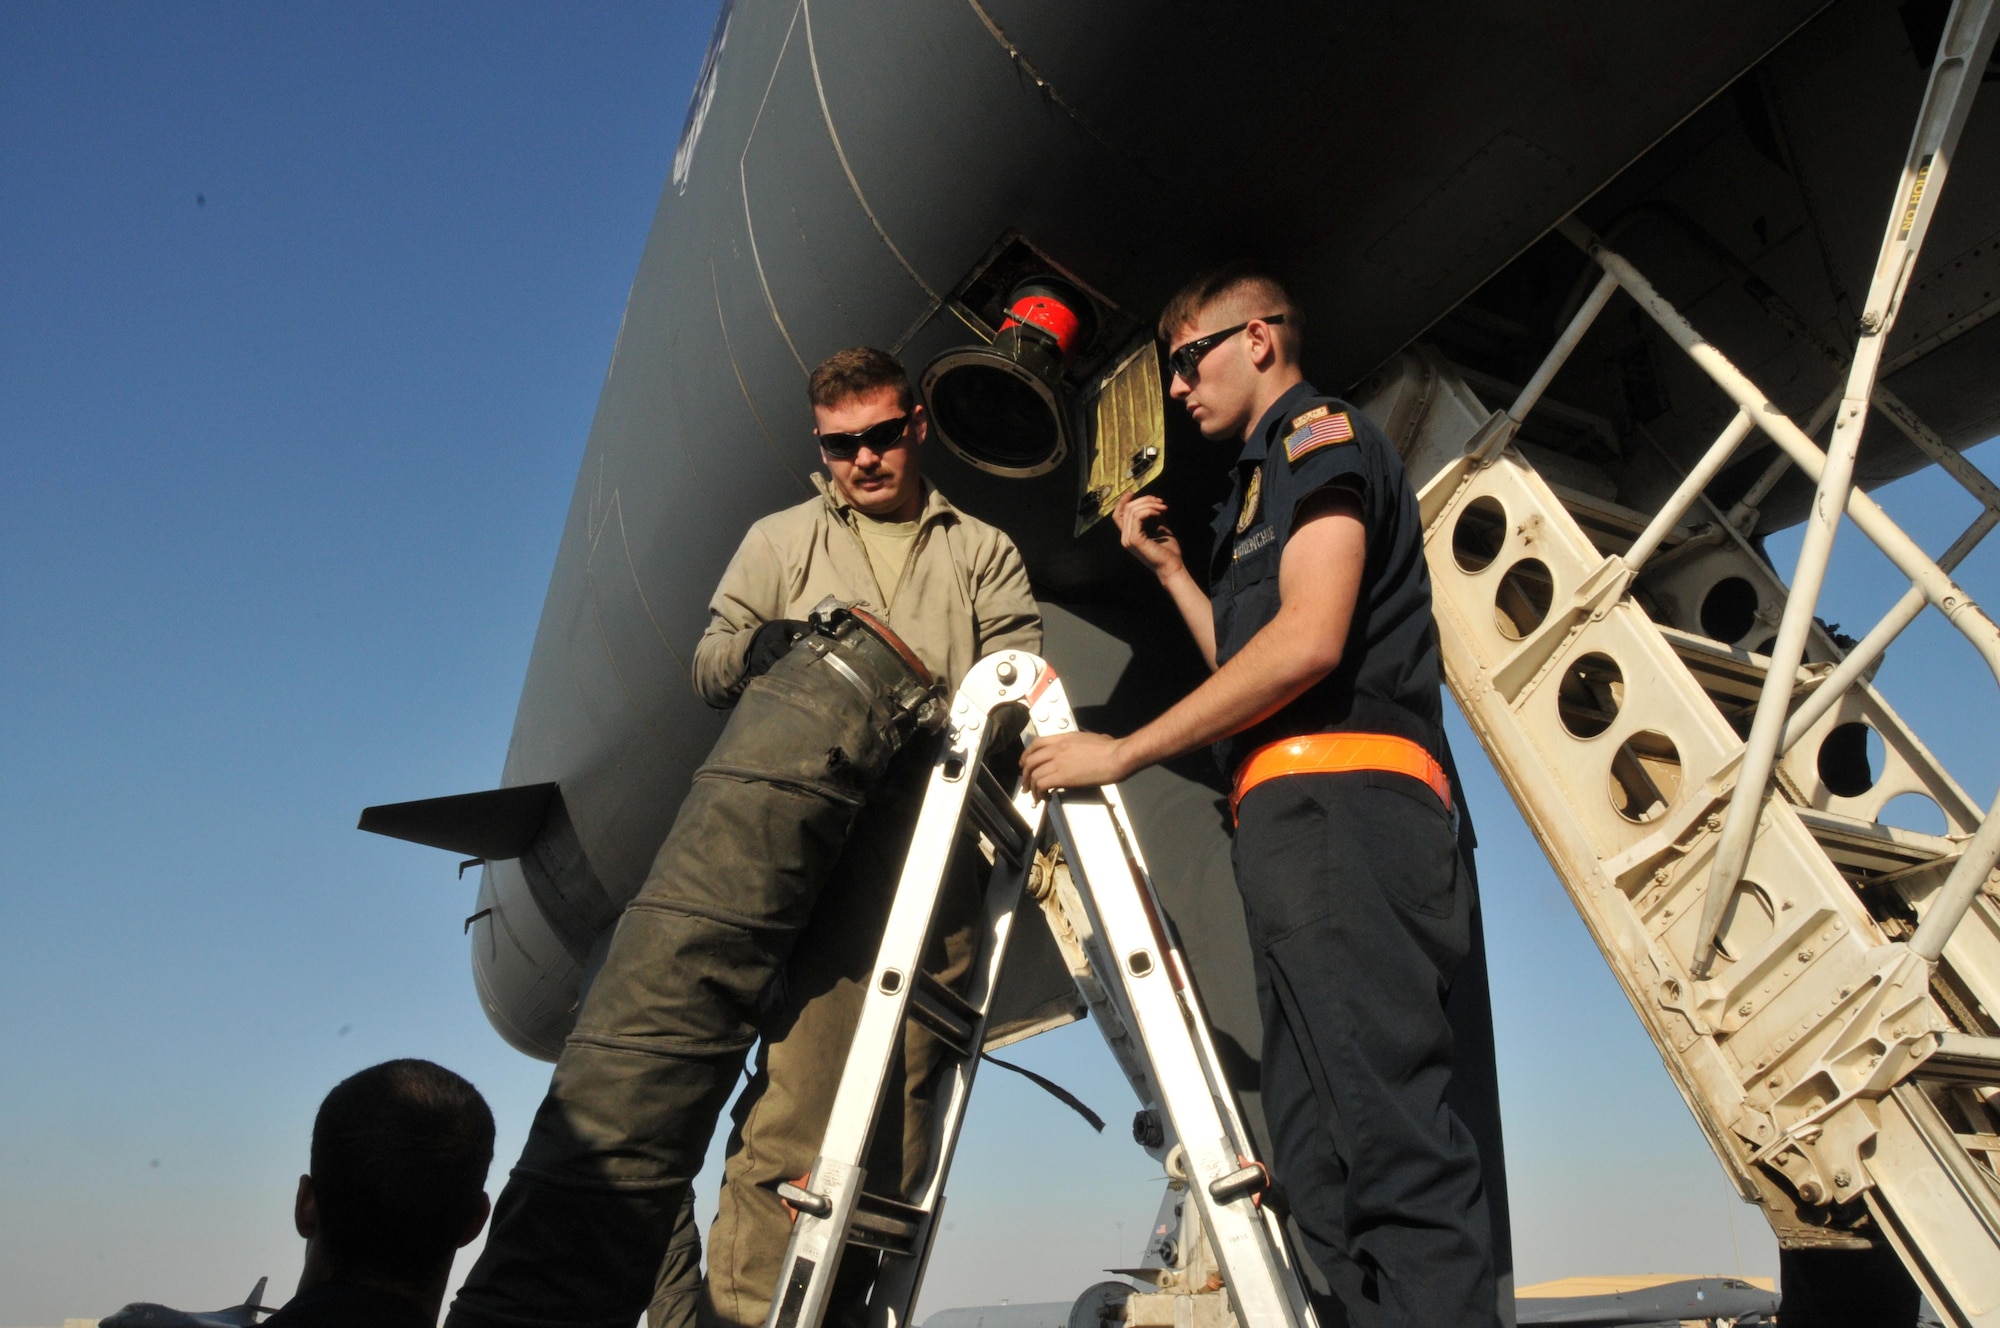 Senior Airman Brandon Wilkins (left) and Airman 1st Class Jacob Shores (right), hook up power and air to a B-1 B Lancer Jan. 11 at Al Udeid Air Base, Qatar. During a post-flight inspection, maintainers hook up both power and air which allows the jet to stay cool while it receives gas. Wilkins and Shores are maintainers deployed from Ellsworth Air Force Base, South Dakota. (U.S. Air Force photo by Tech. Sgt. Terrica Y. Jones/Released)